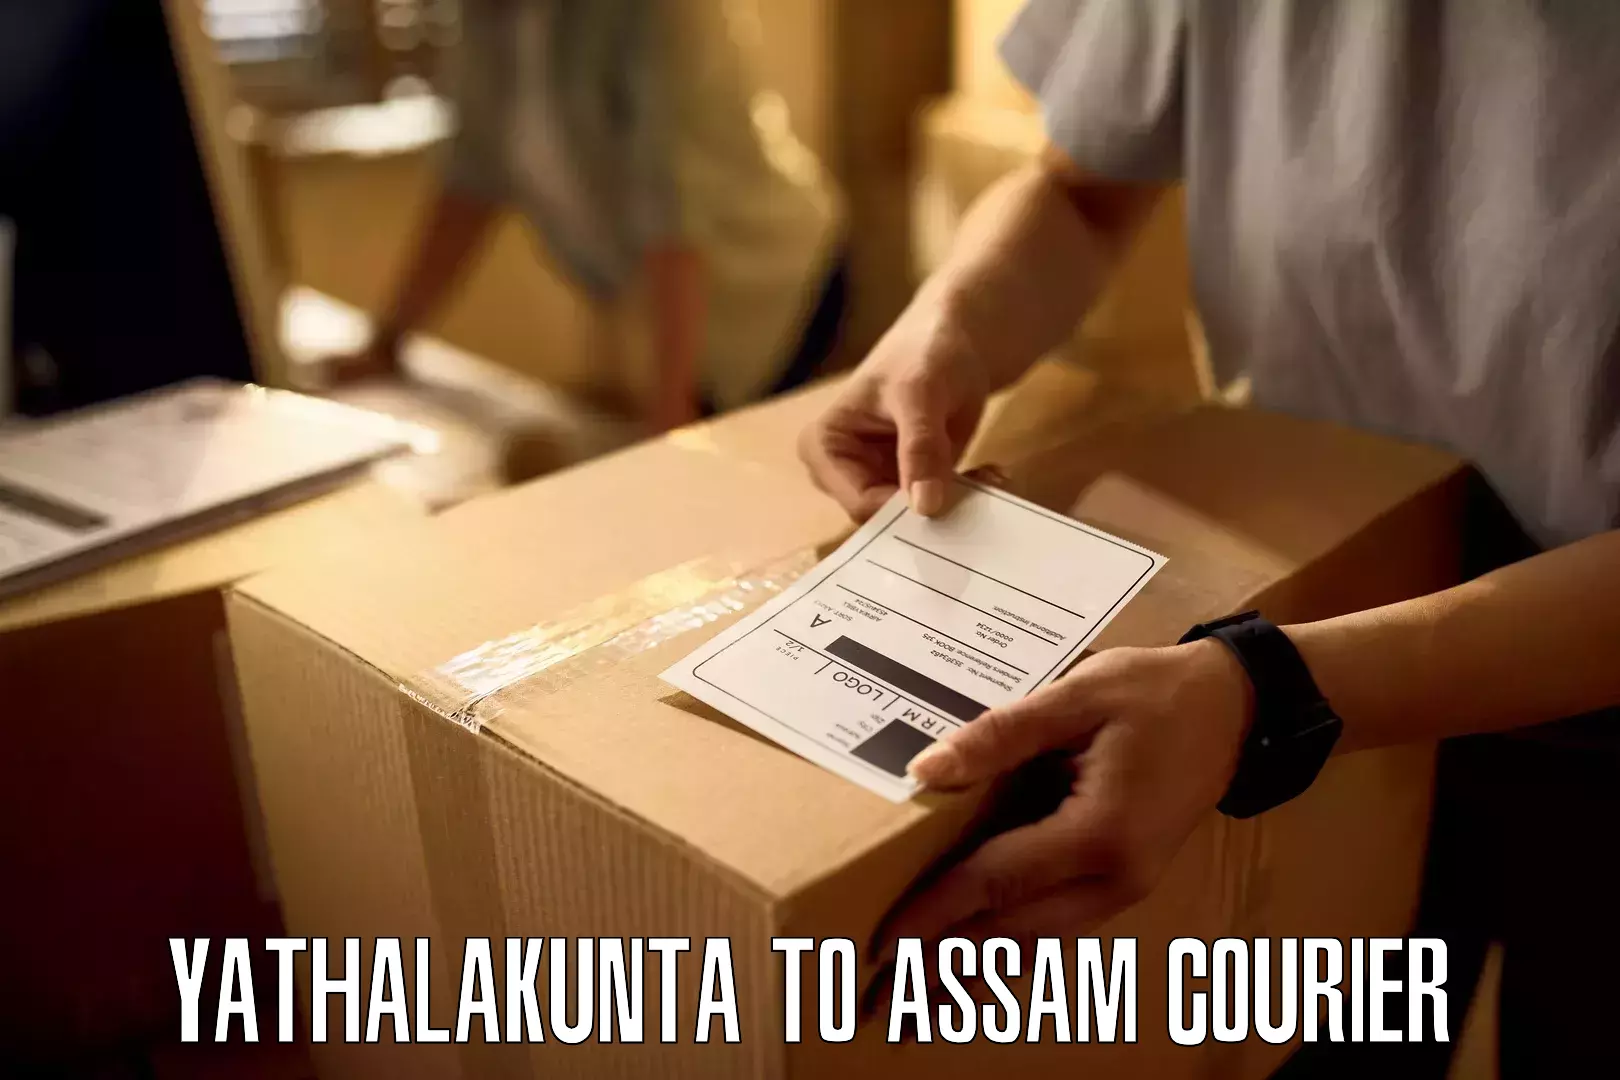 Enhanced tracking features Yathalakunta to Assam